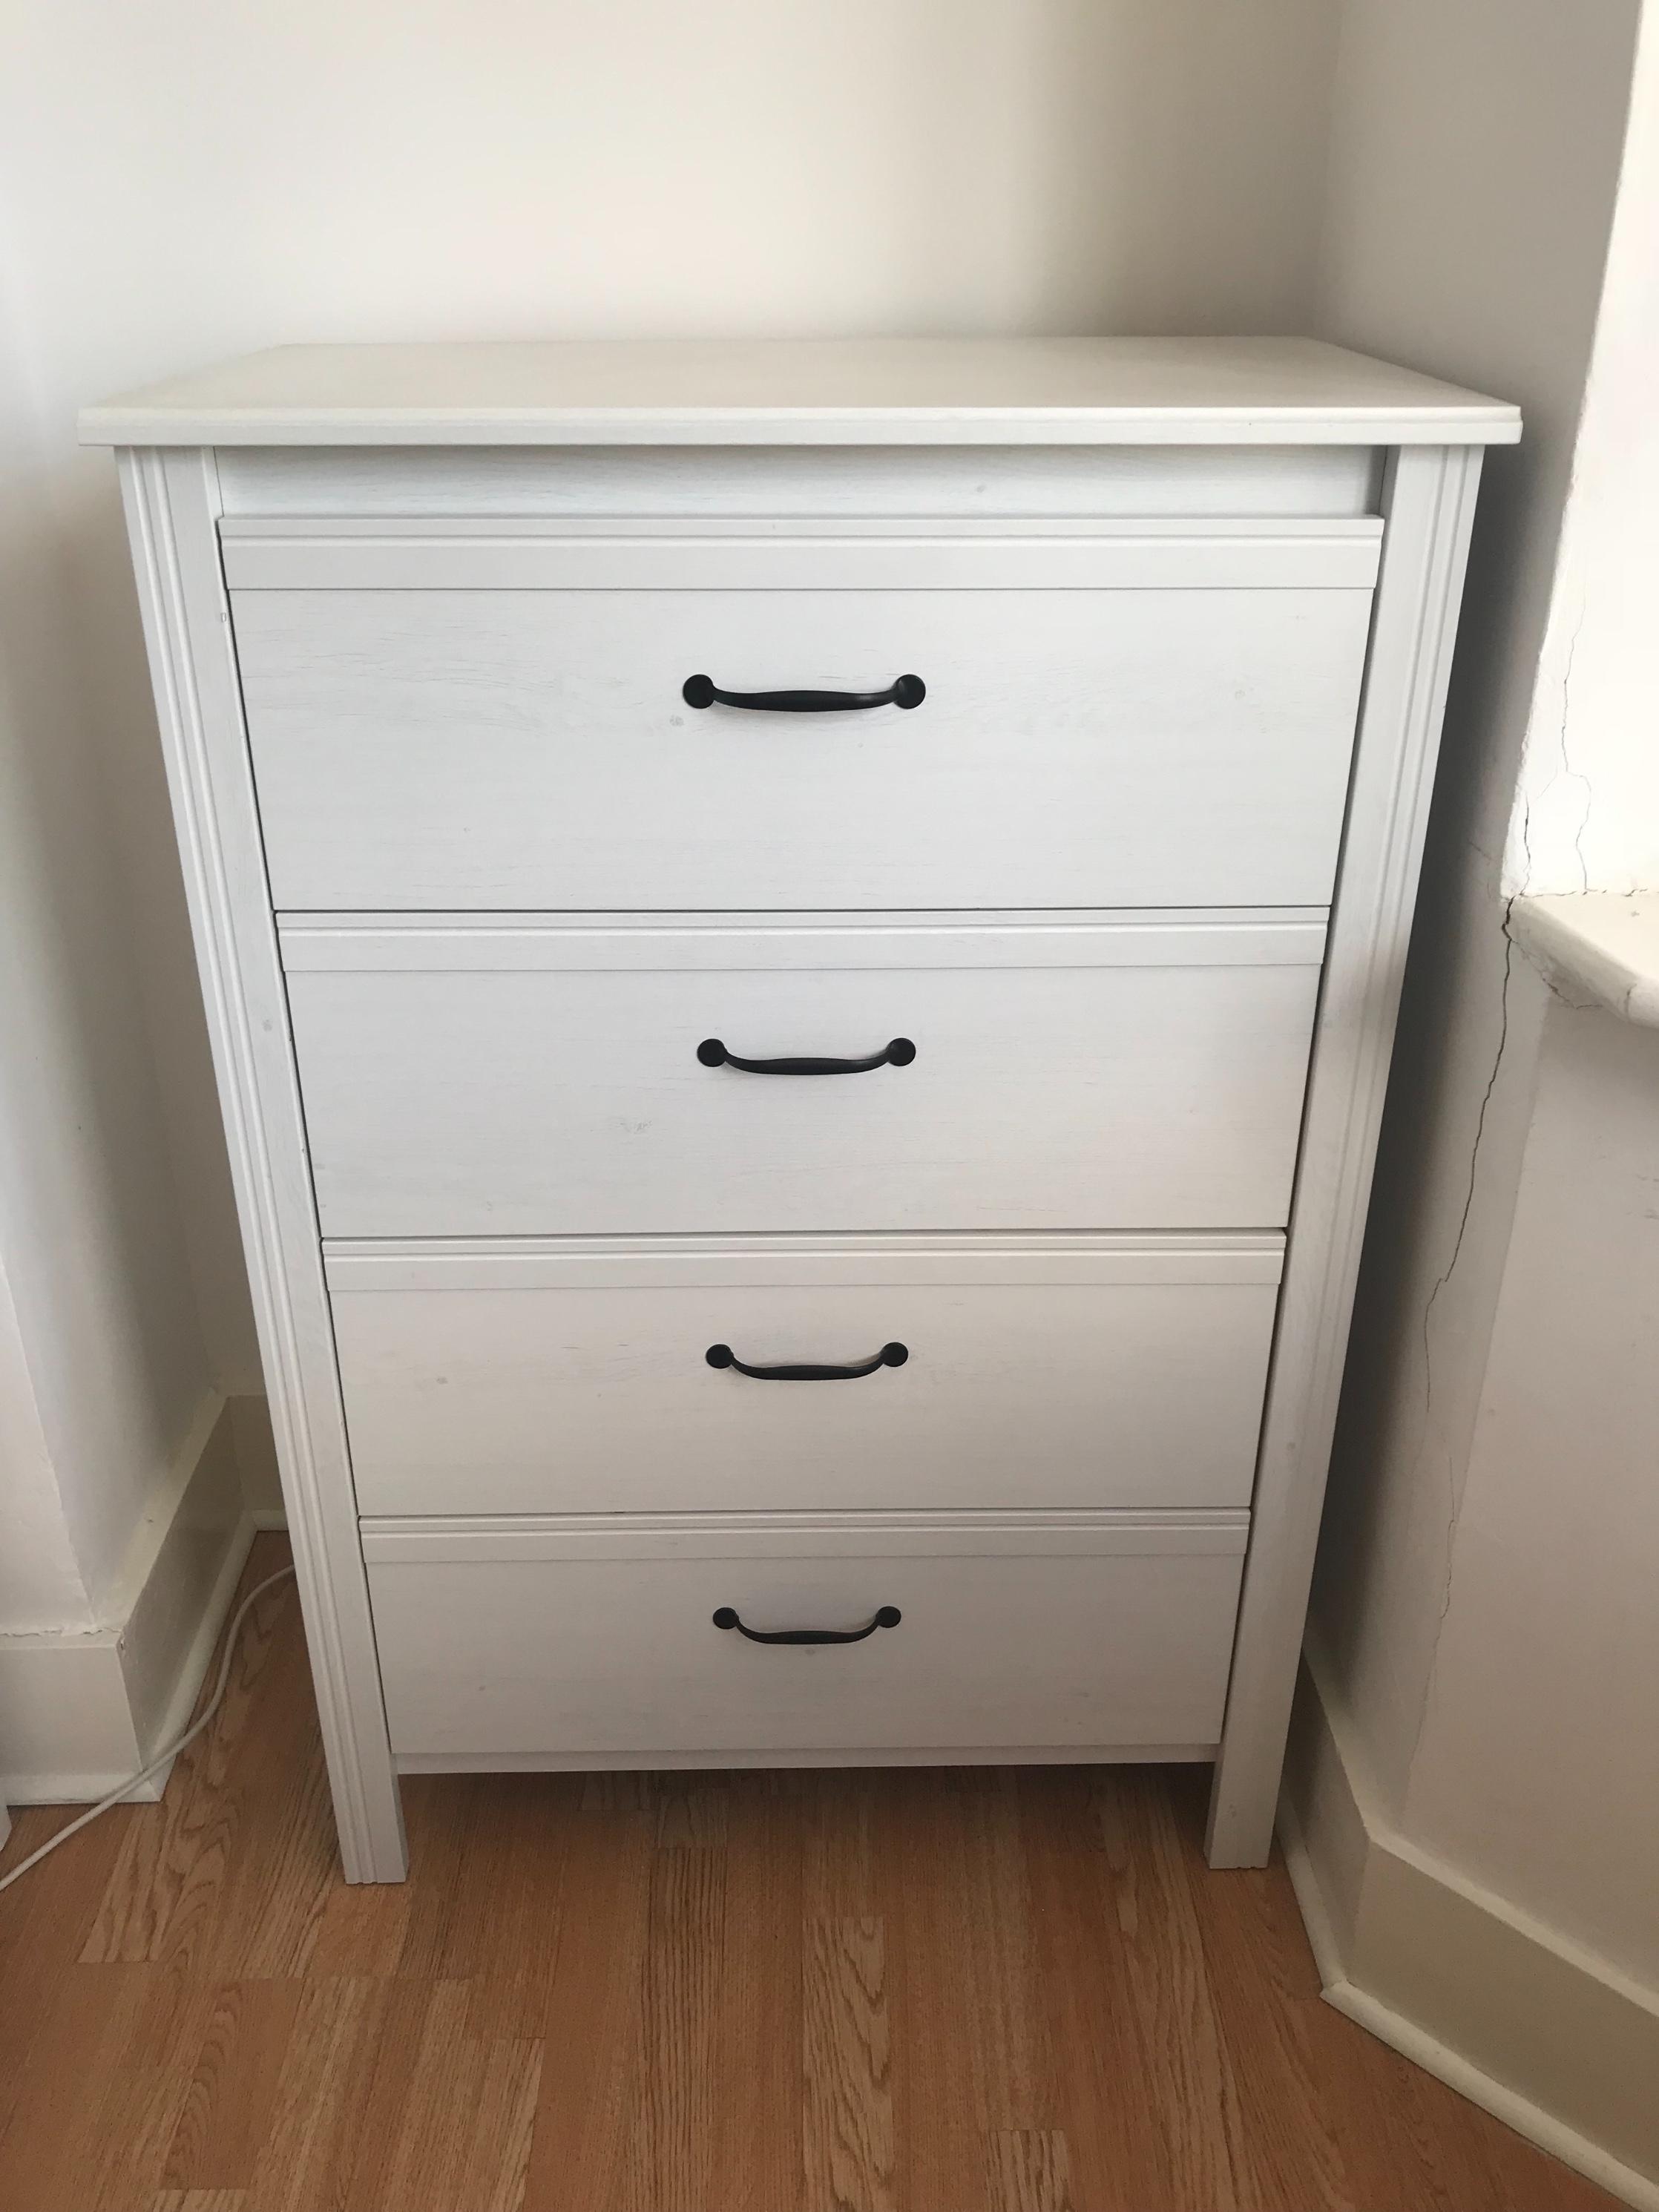 Ikea Brusali Chest of Drawers white 4 drawers in W13 Ealing for £60.00